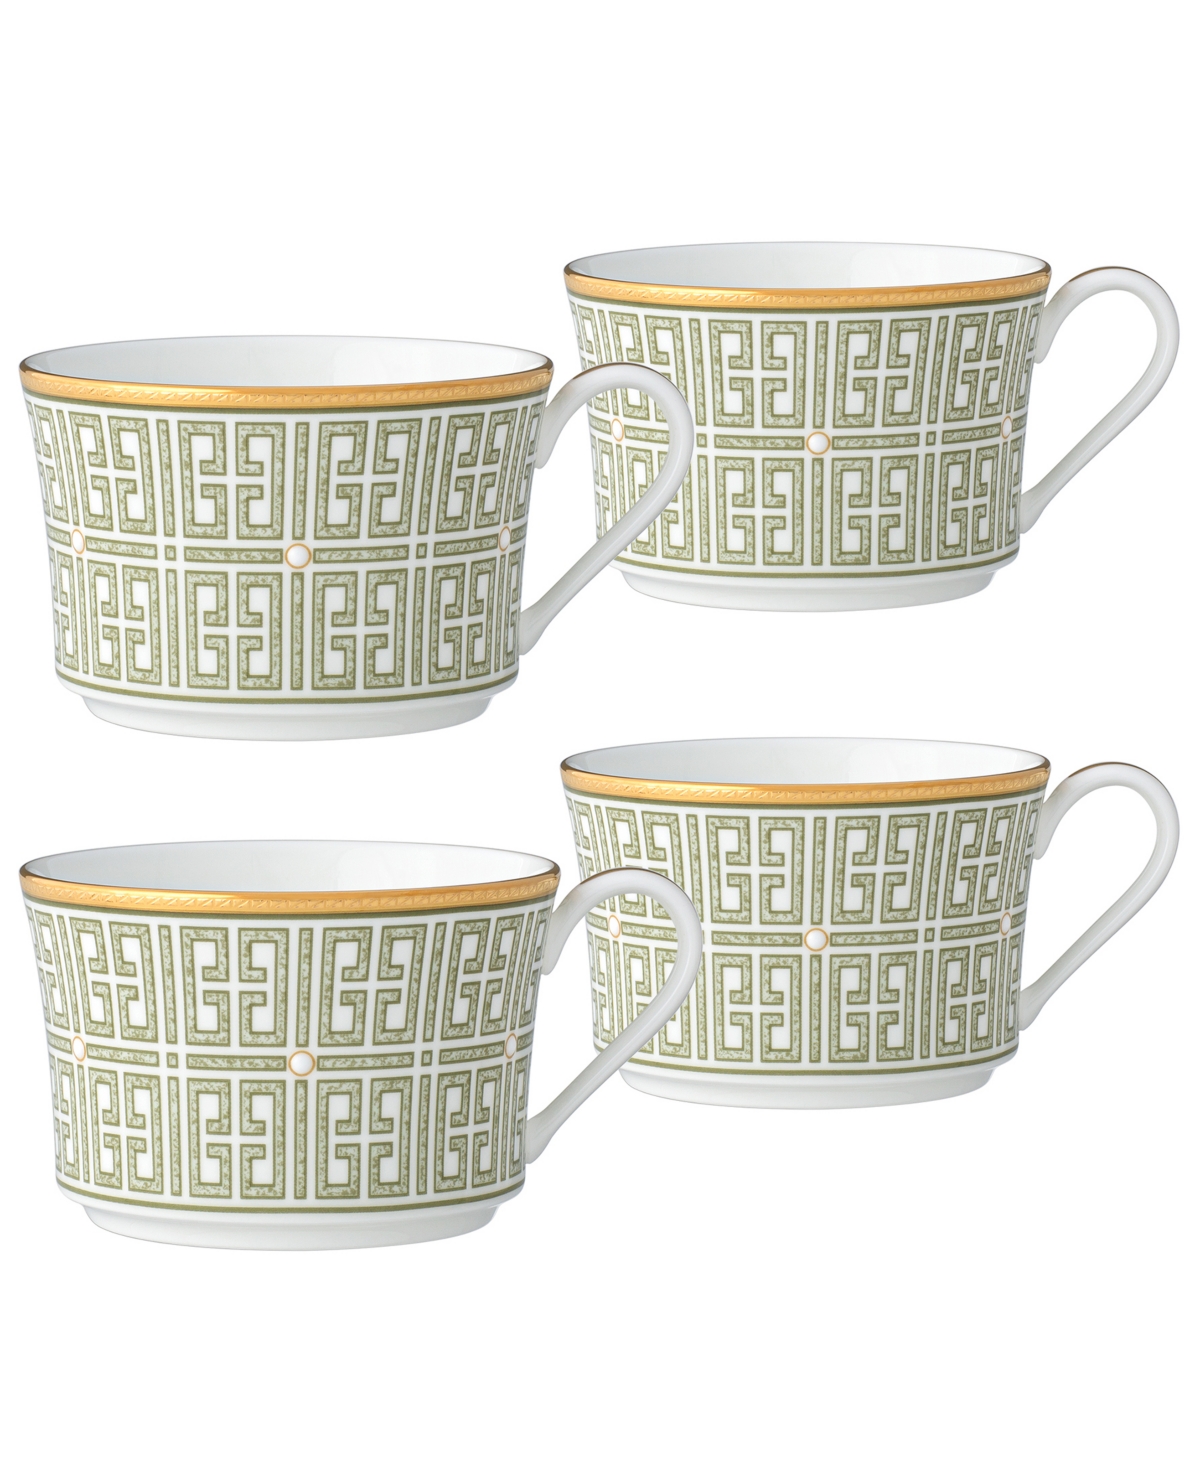 Noritake Infinity 4 Piece Cup Set, Service For 4 In Green Gold